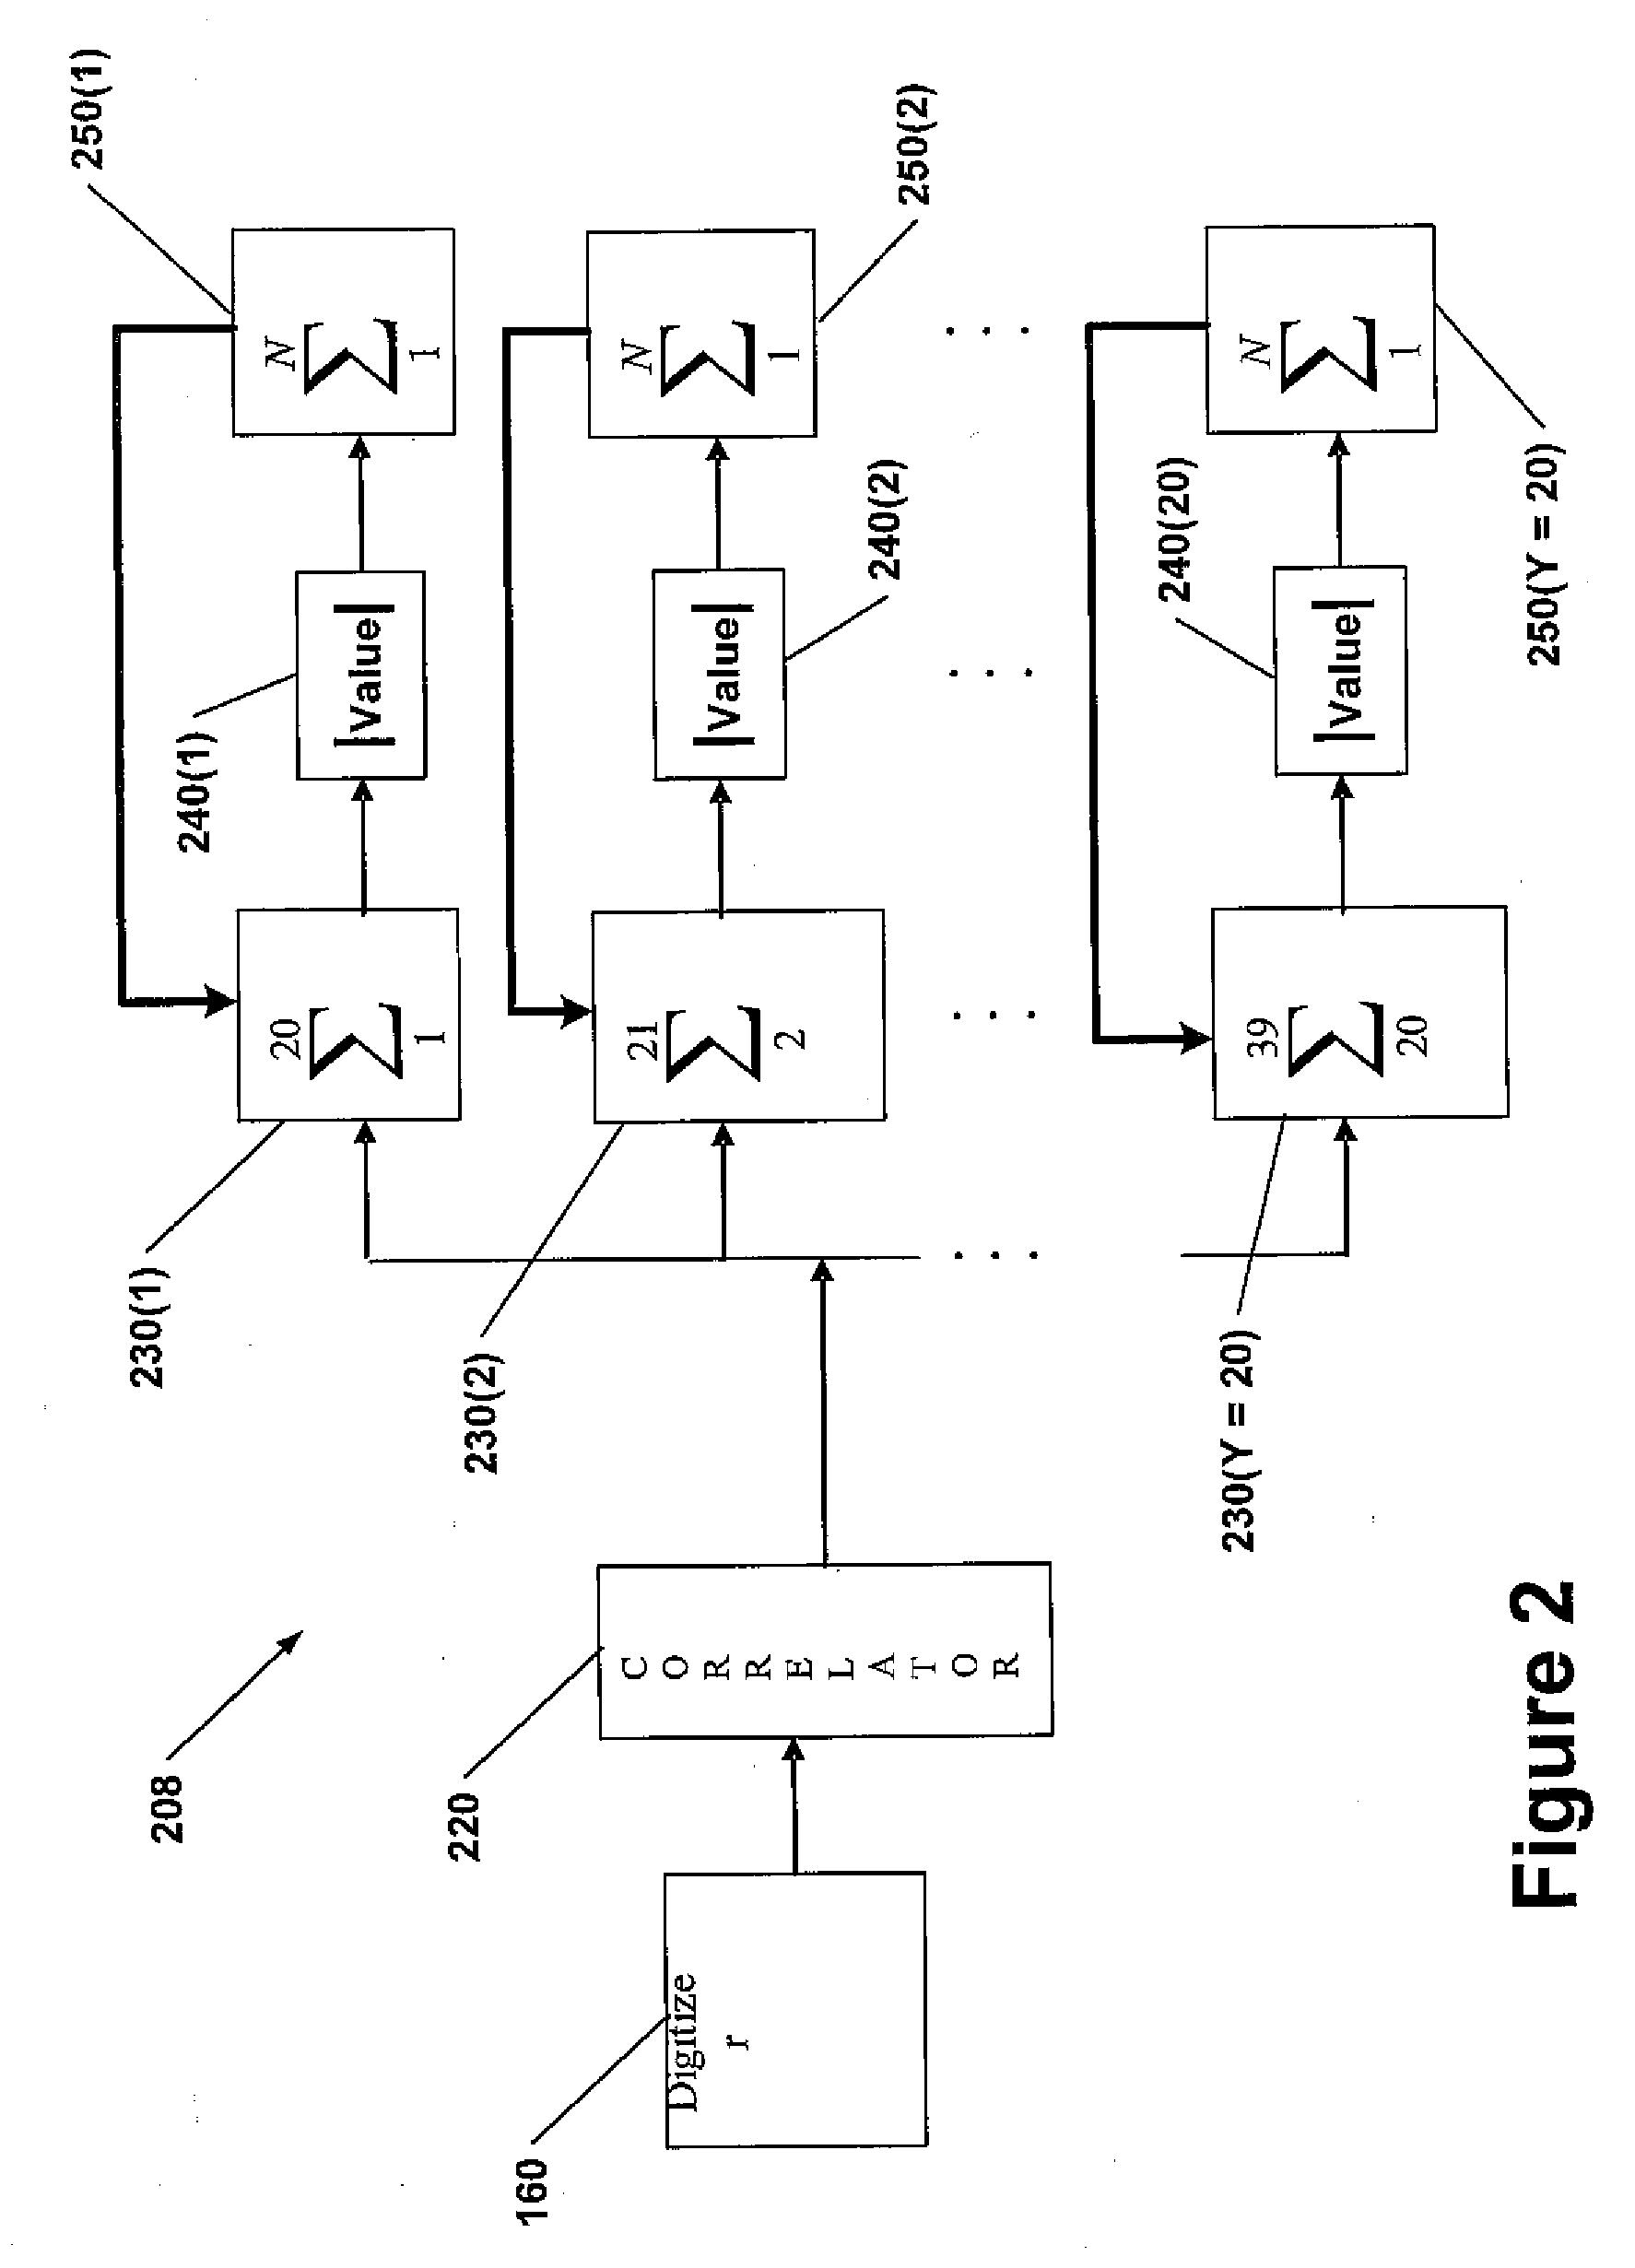 System and Method for Synchronizing Digital Bits in a Data Stream